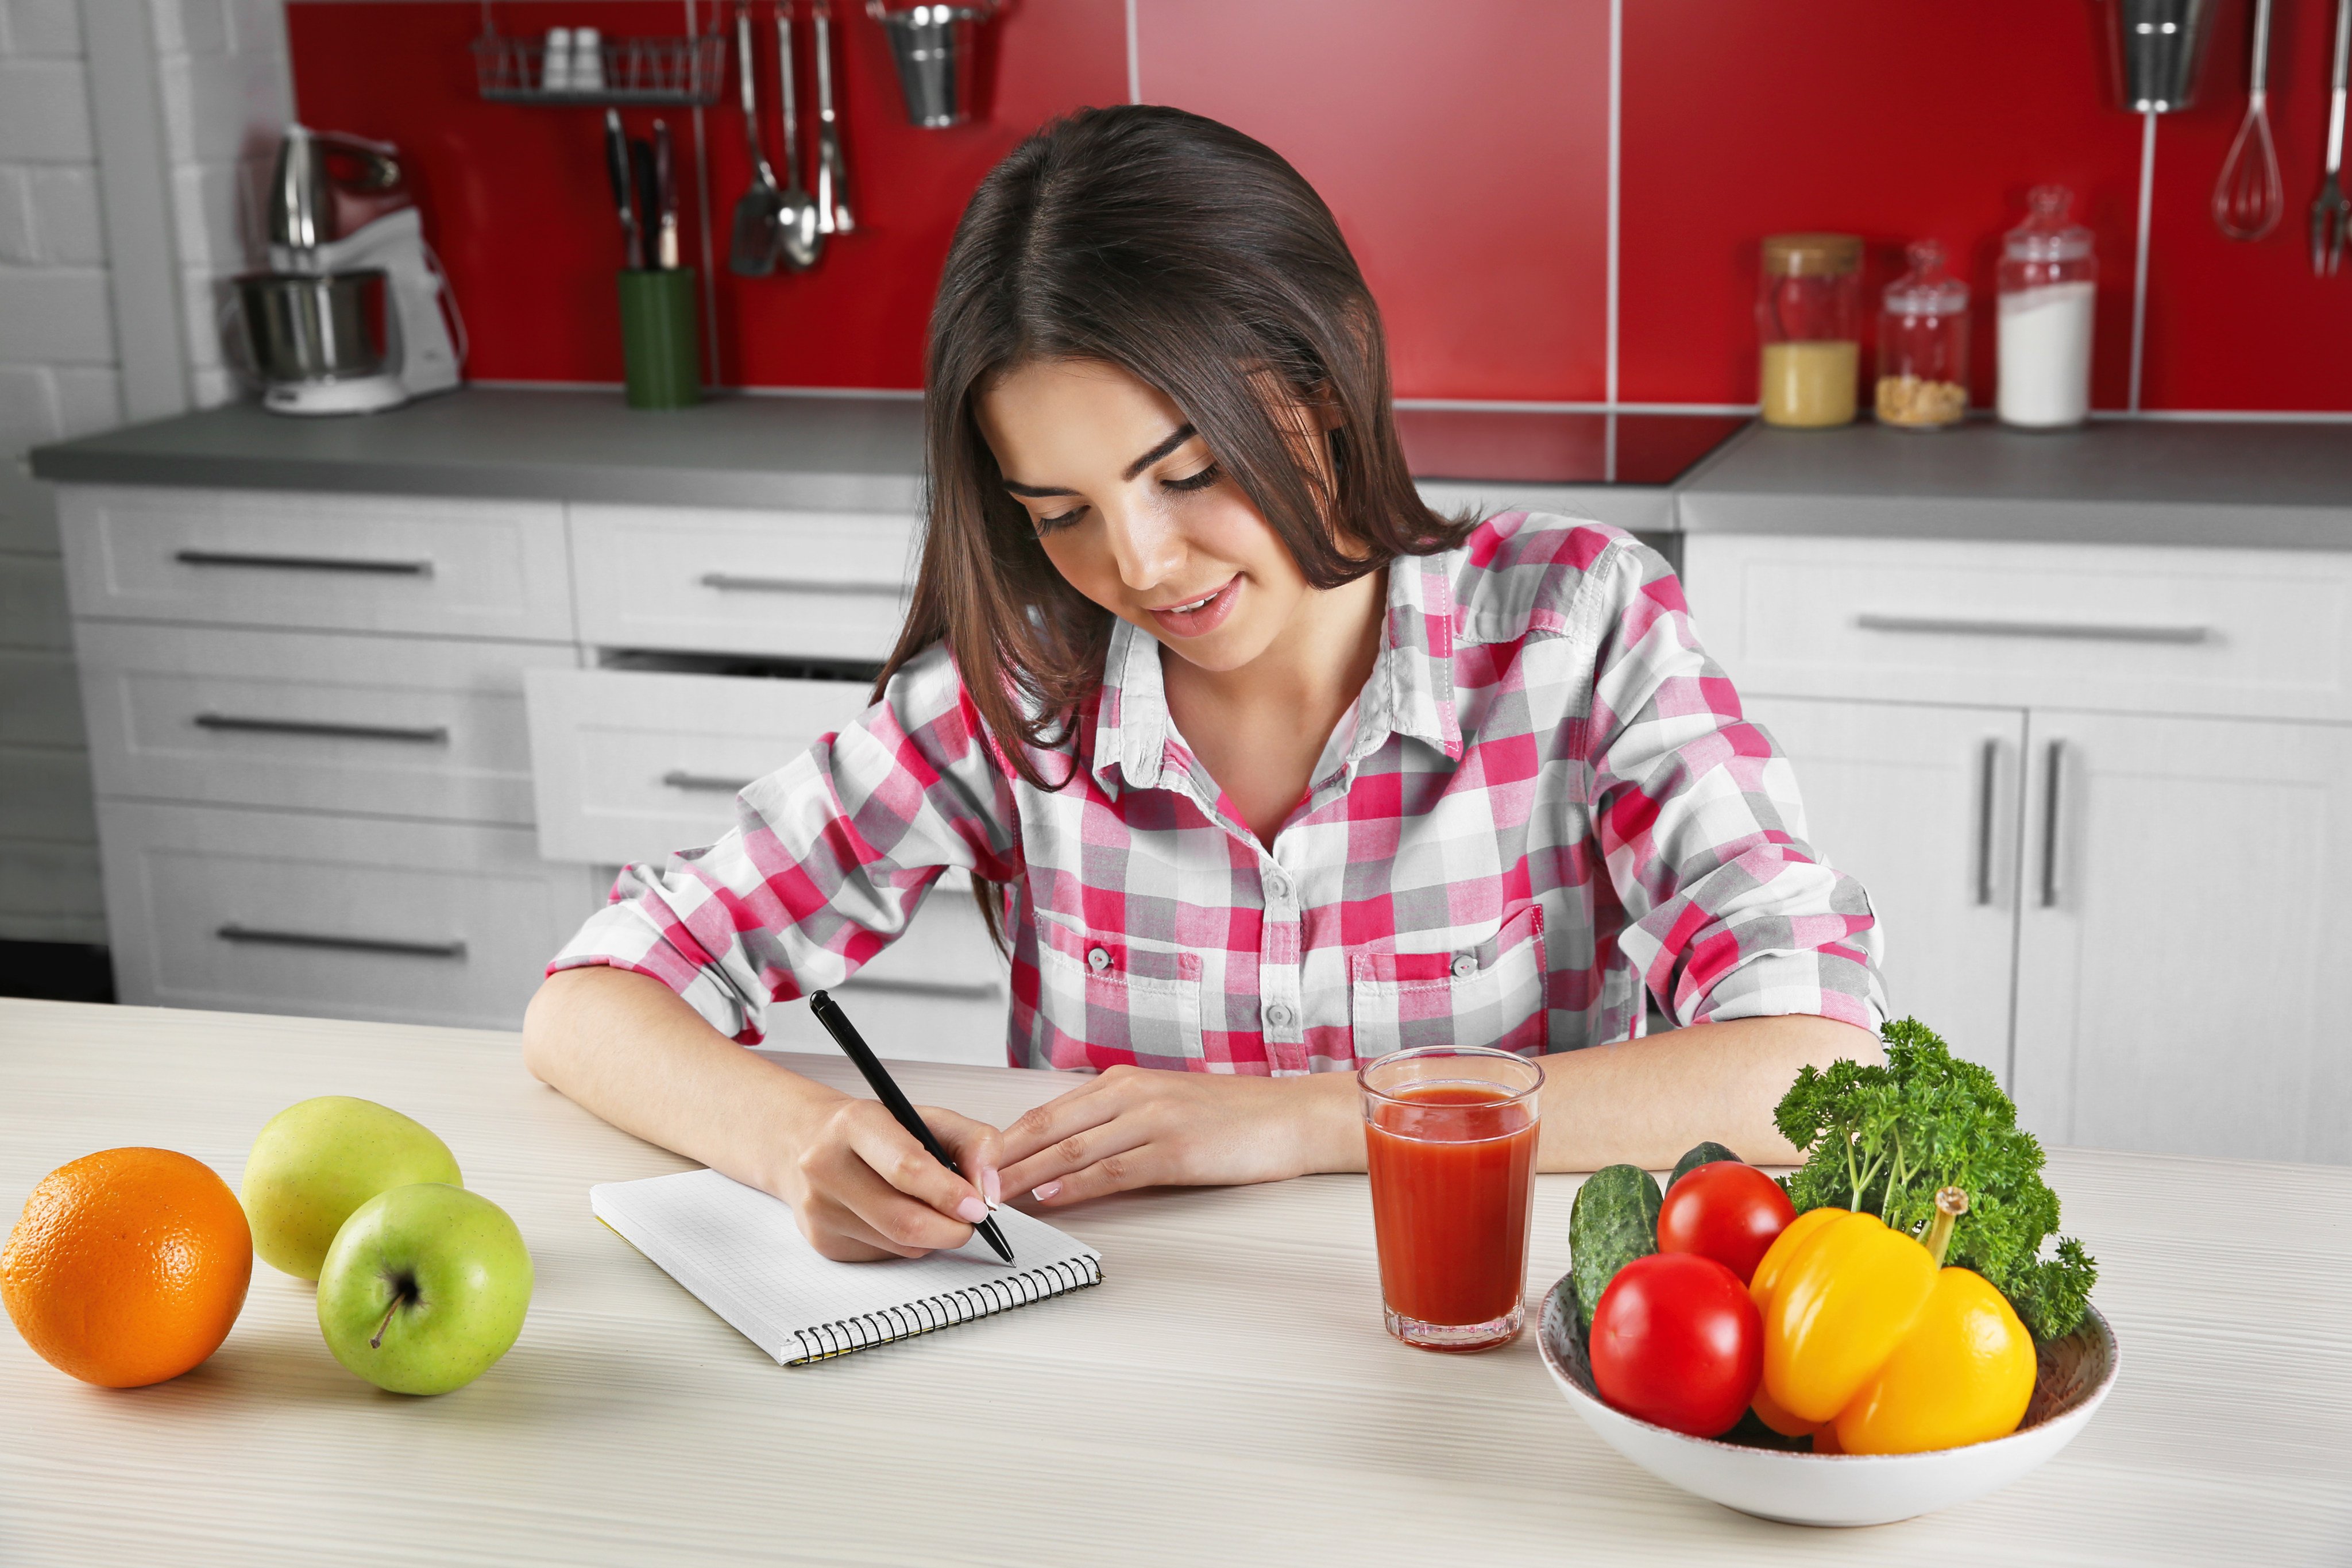 Keeping a journal to note when food cravings appear, their intensity and how you deal with them is one expert tip when it comes to fasting - whether you’re doing it for health reasons such as weight loss or for holy seasons. Photo: Shutterstock